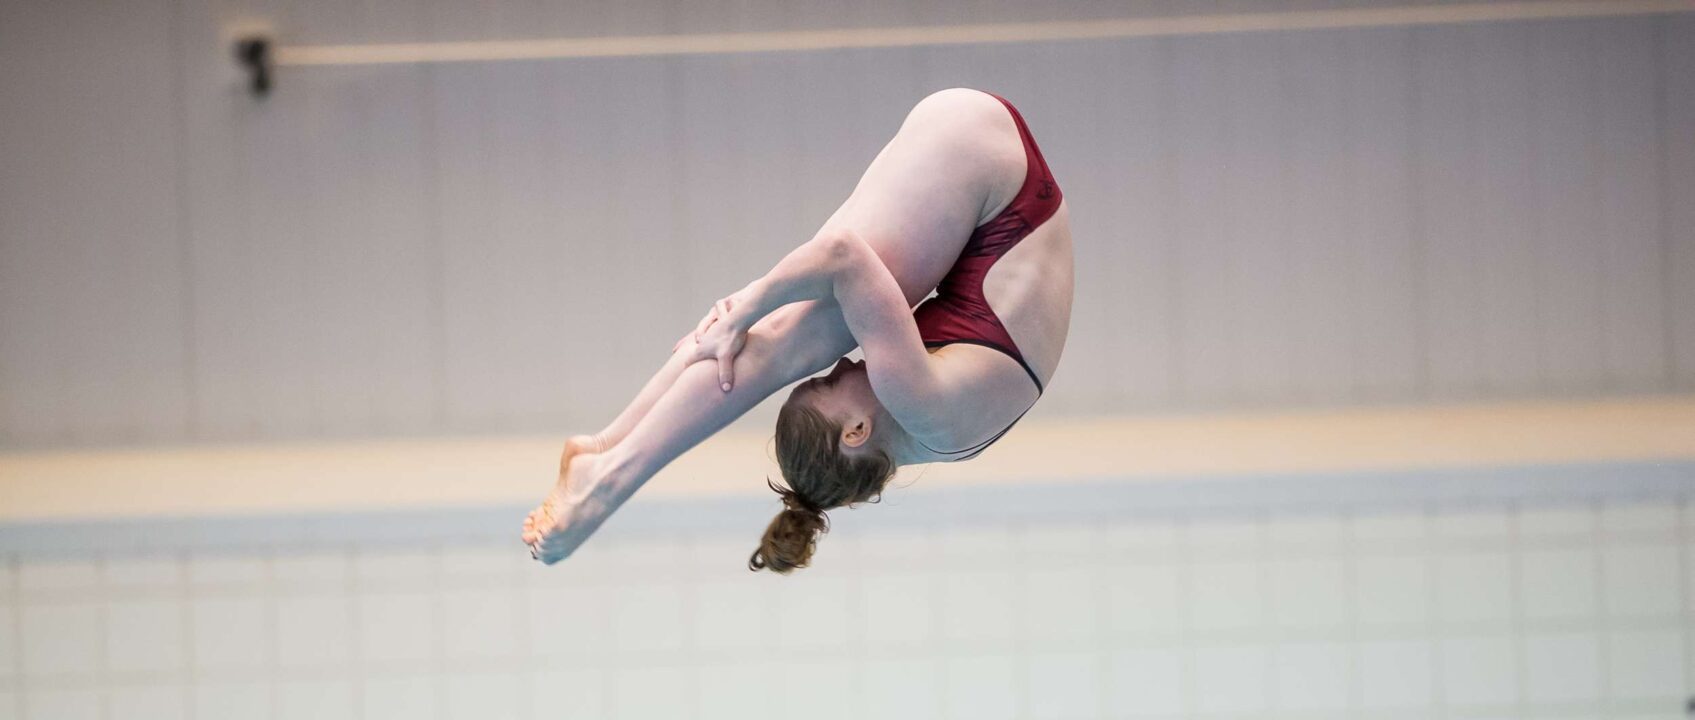 Brooke Schultz Selected To Represent U.S. At FINA Diving World Cup In Berlin